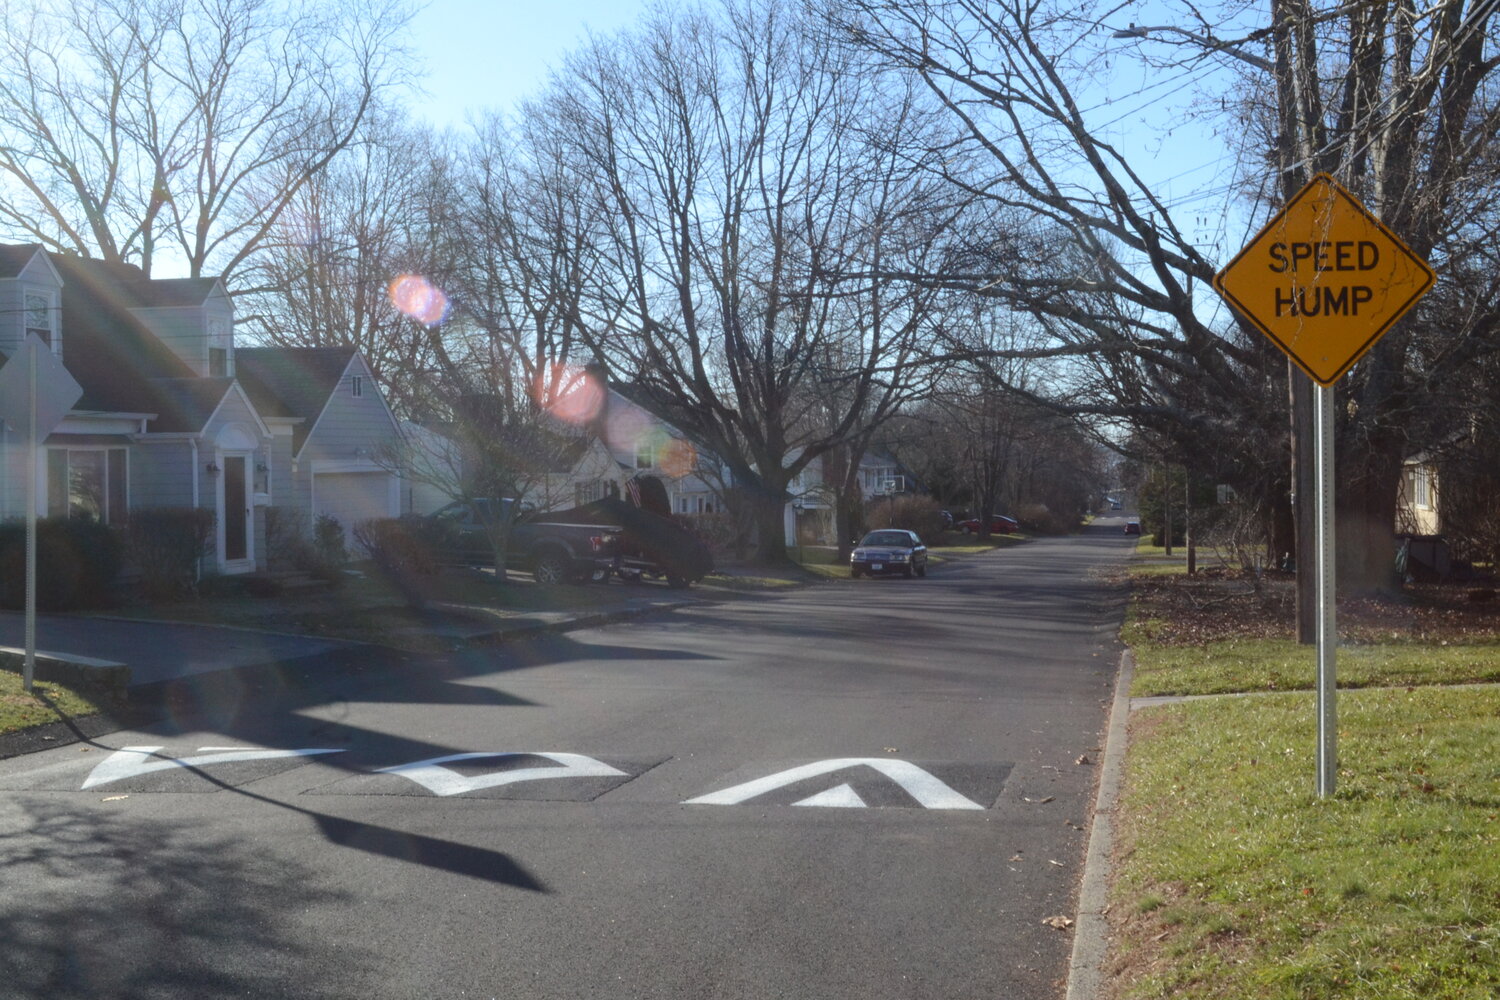 This set of speed humps were recently installed on Peck Avenue, off Hope Street near Rockwell Elementary School.